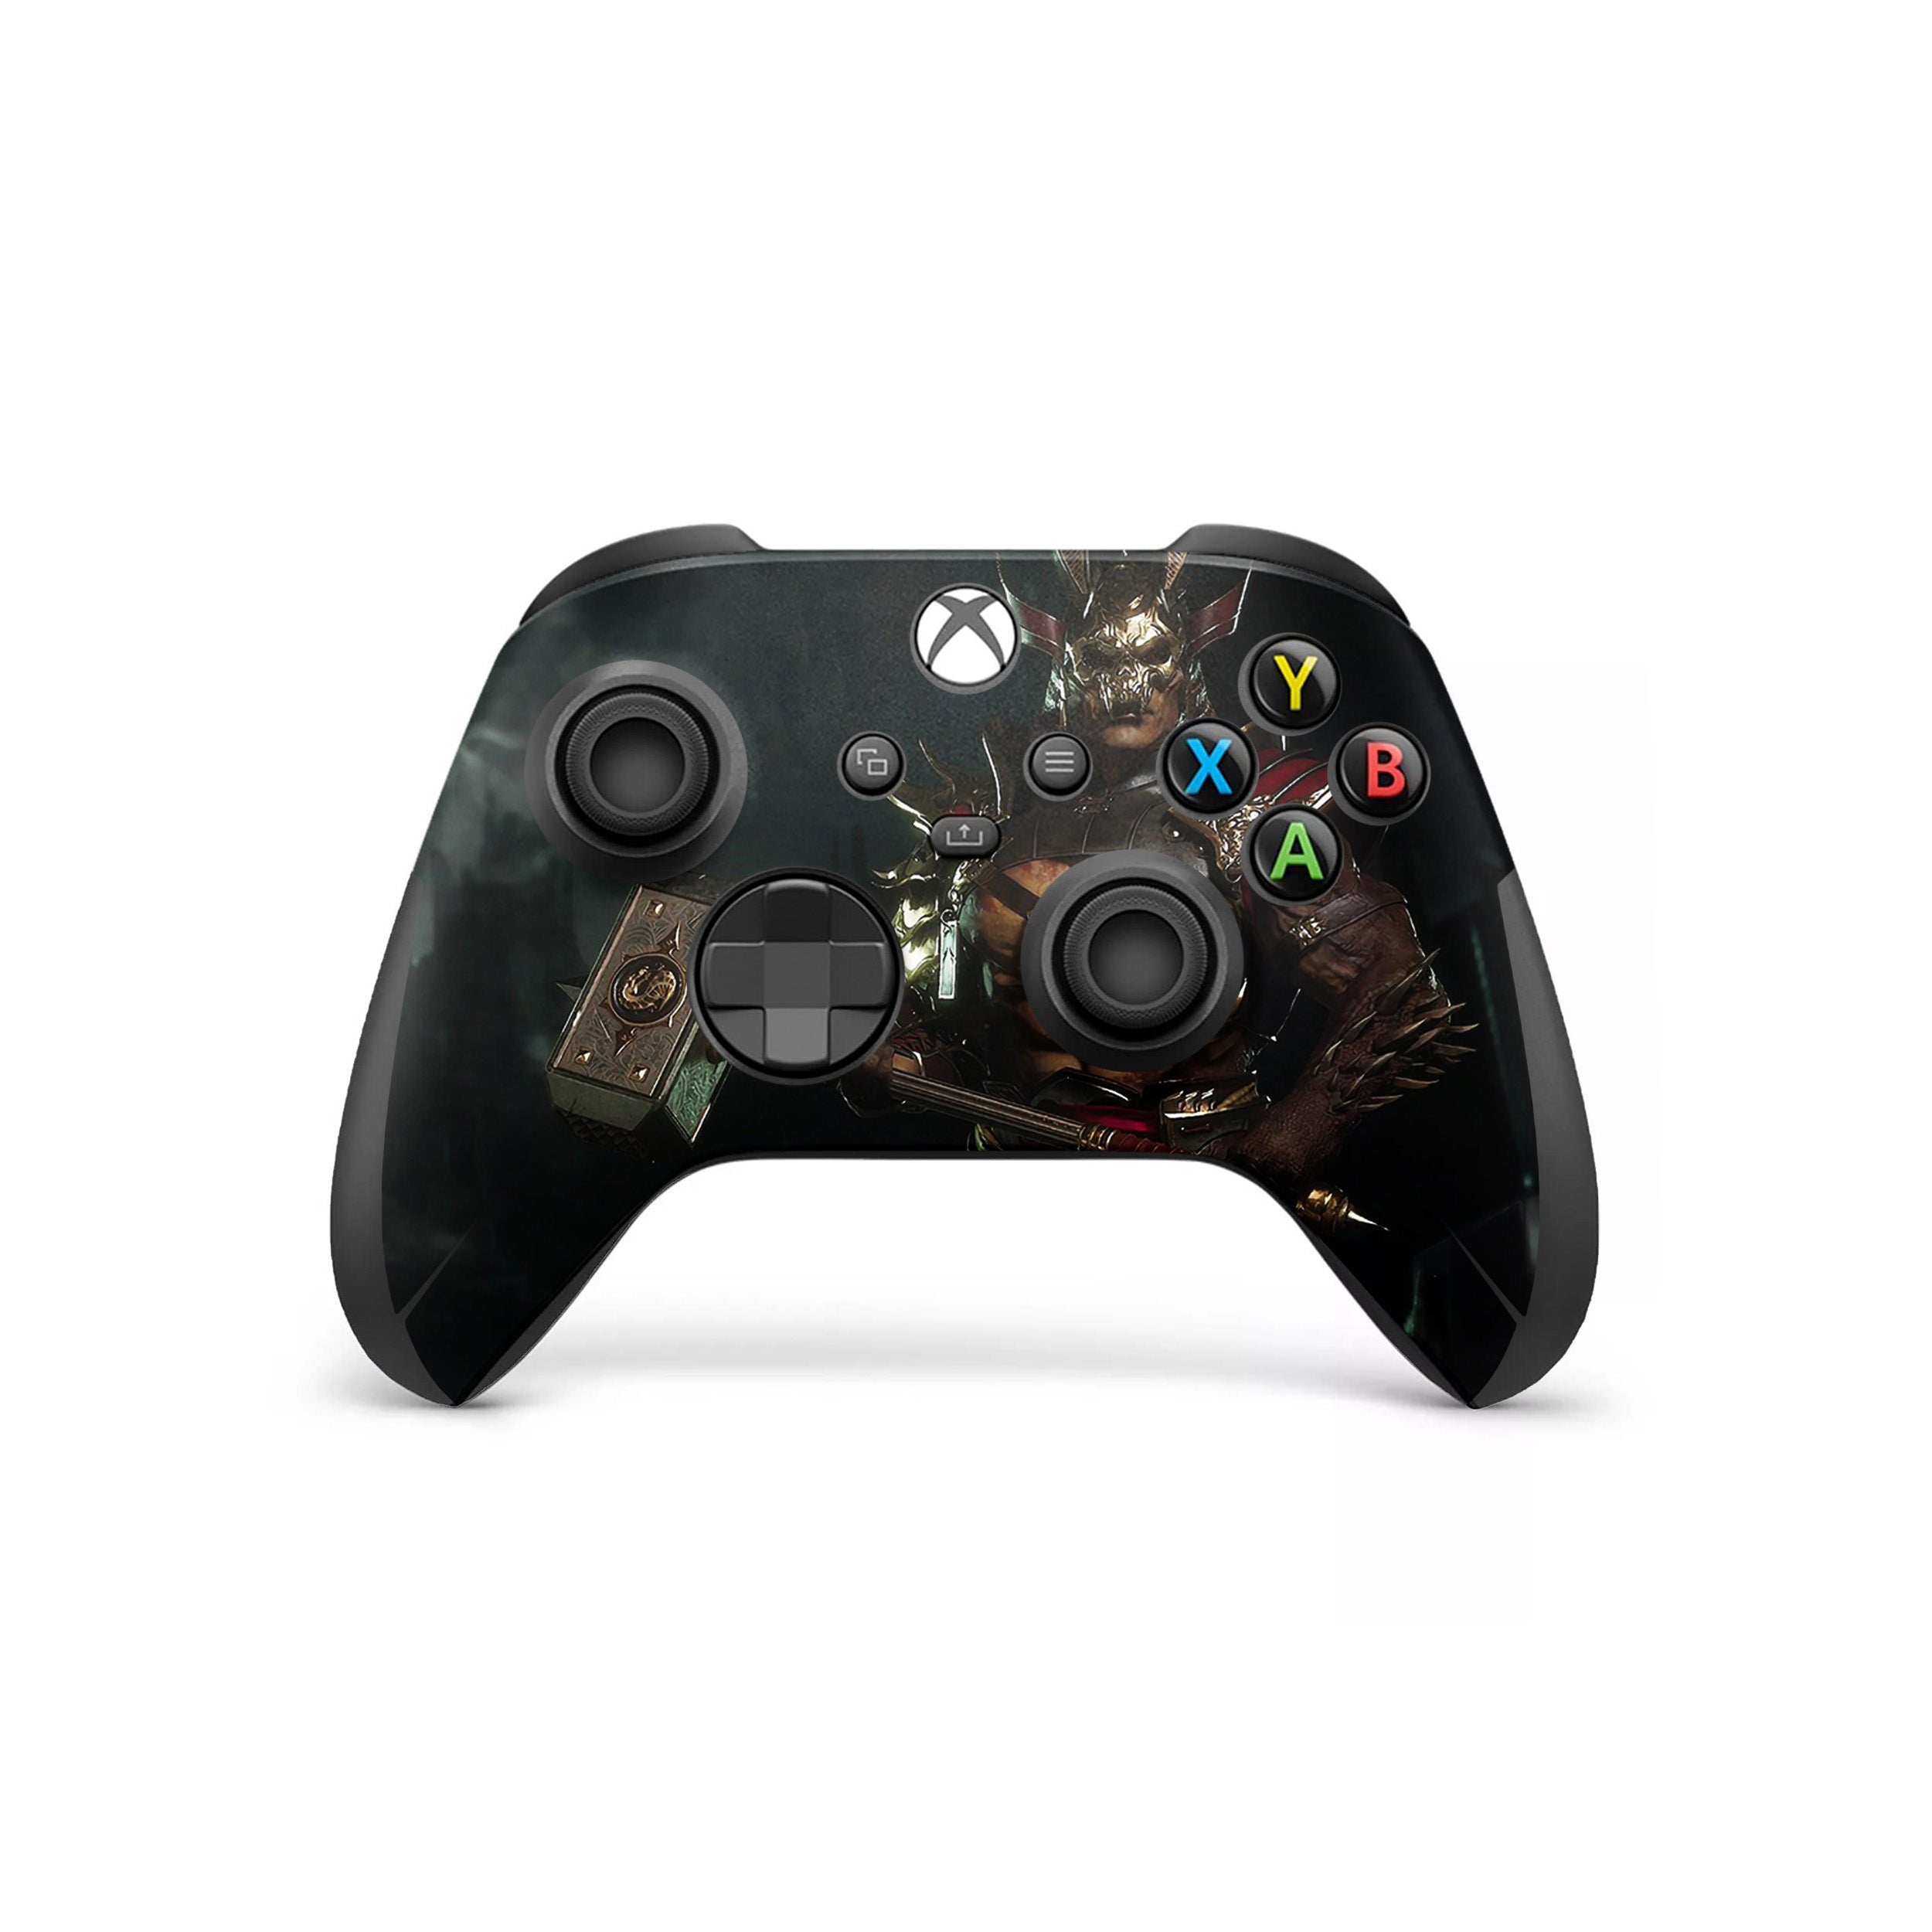 A video game skin featuring a Mortal Kombat 11 Shao Kahn design for the Xbox Wireless Controller.